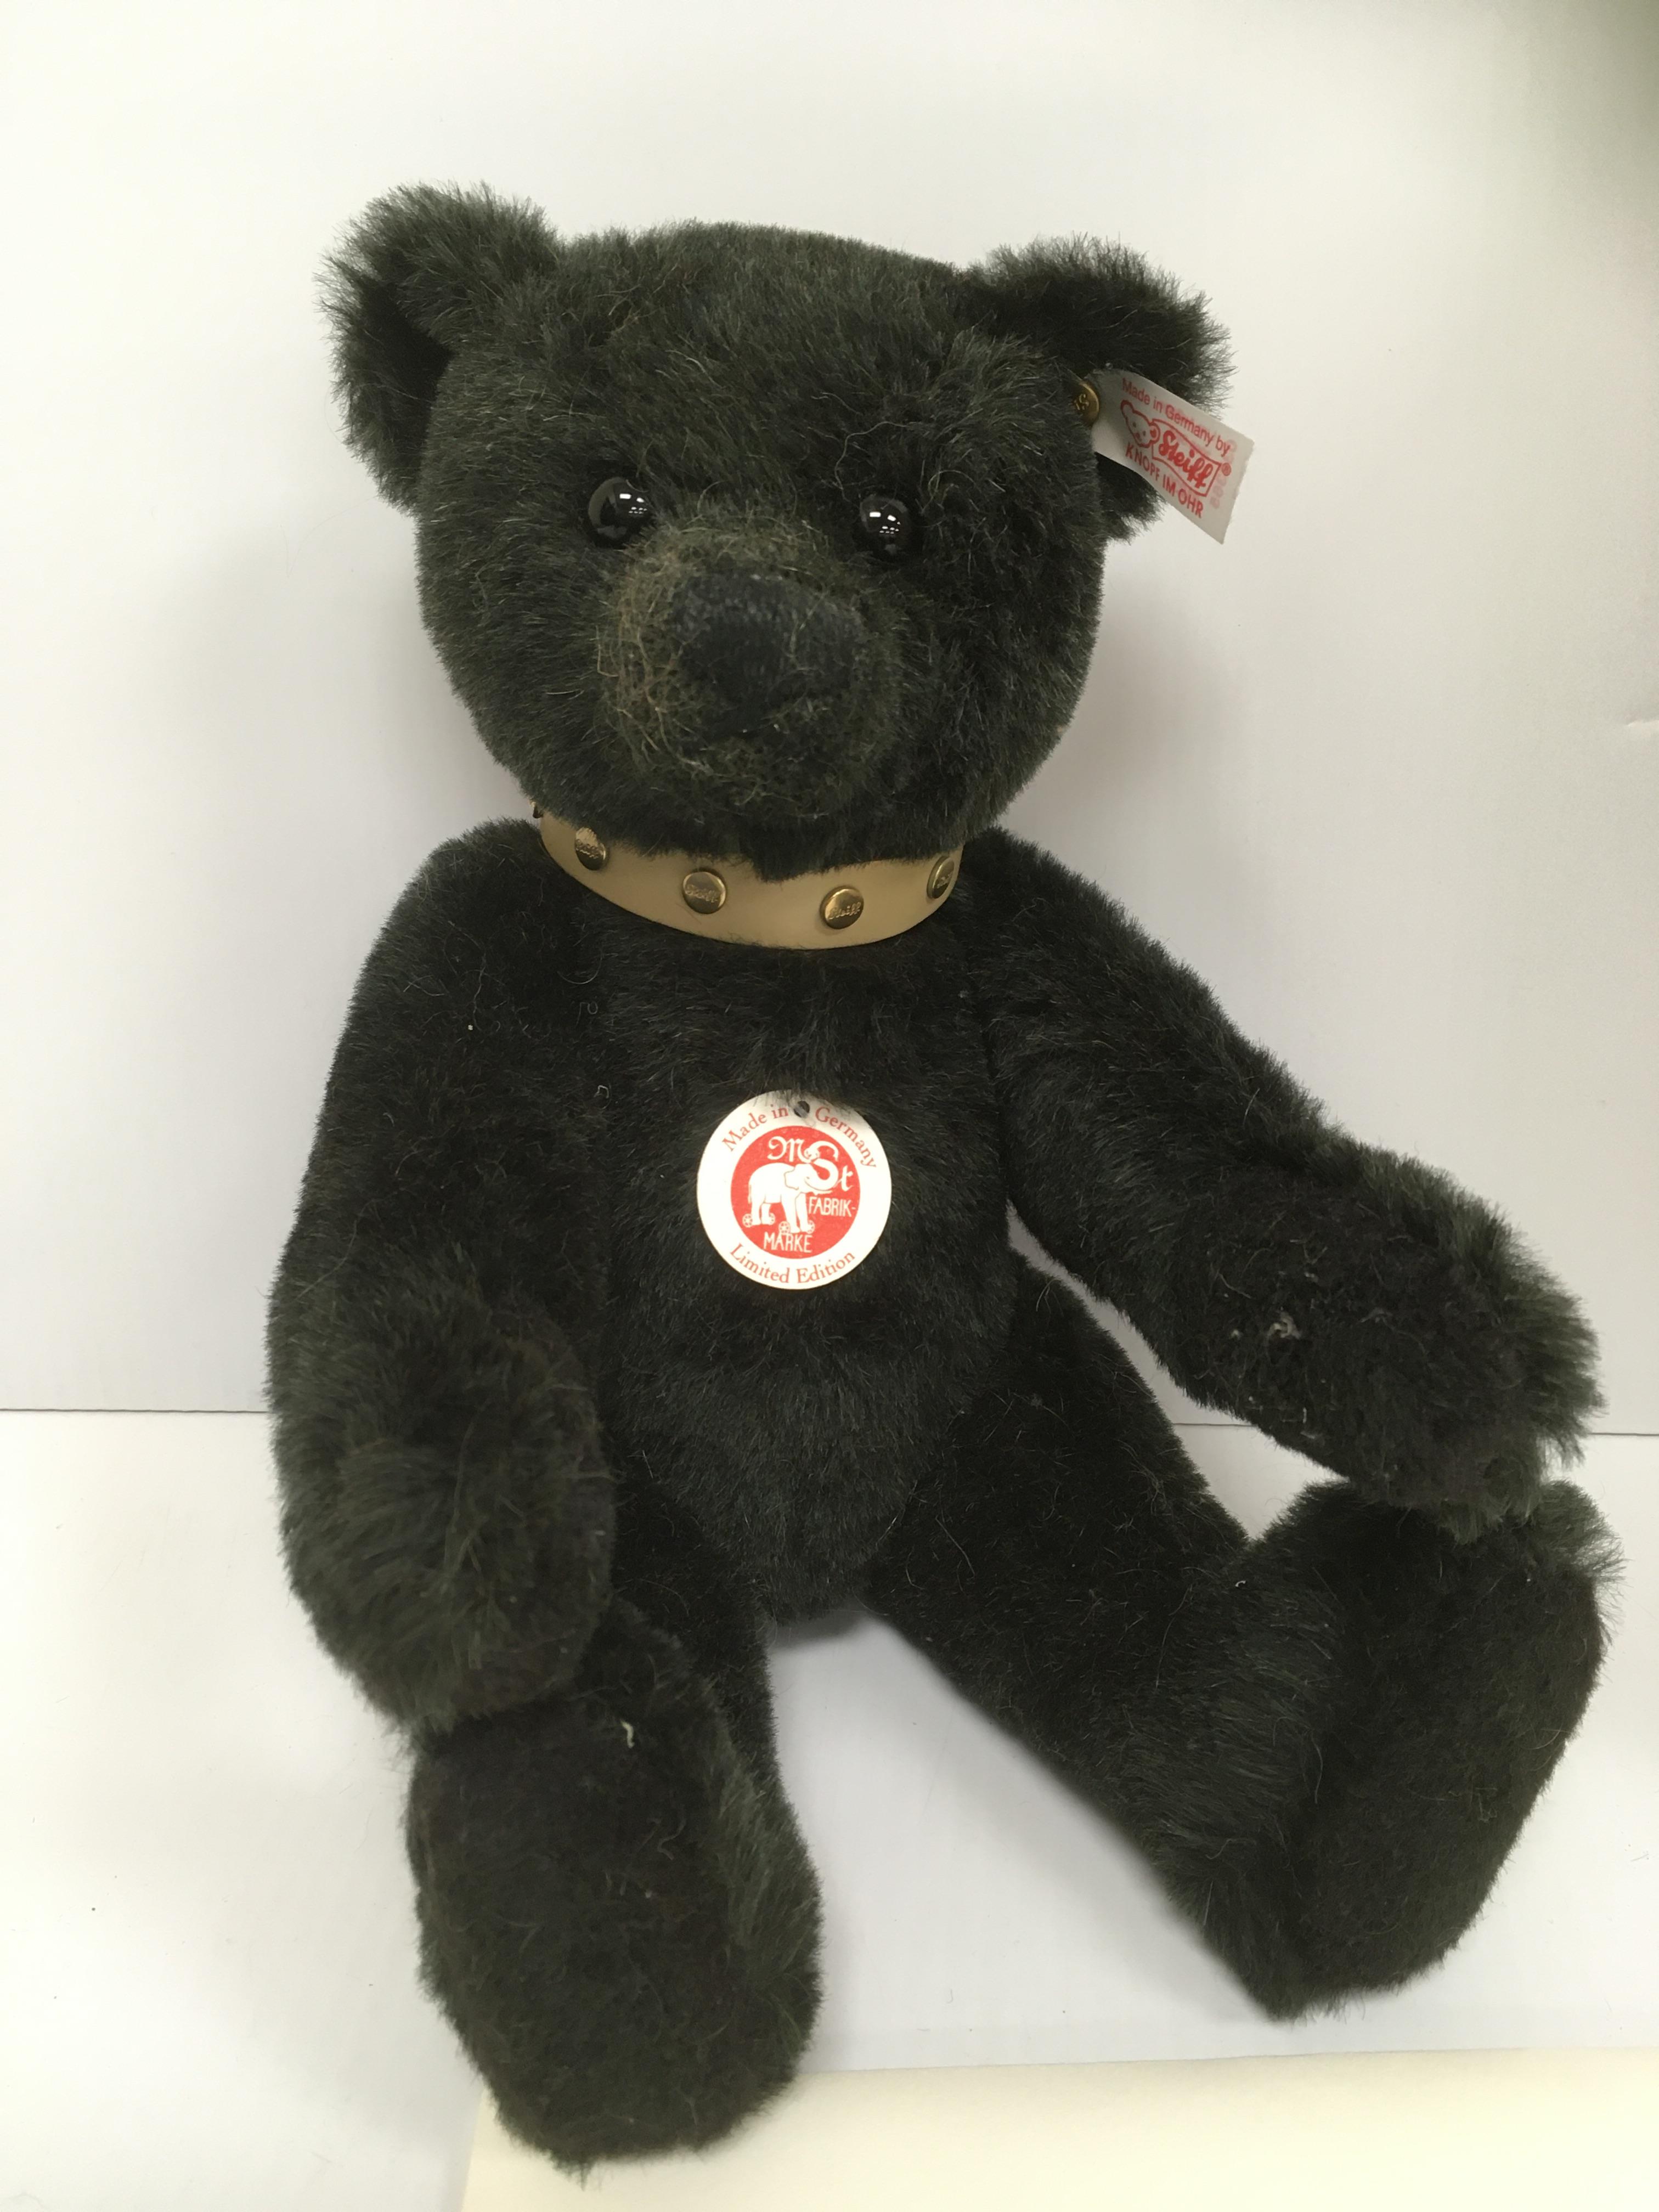 A Steiff 2008 teddy bear with studded leather collar No. - Image 2 of 3